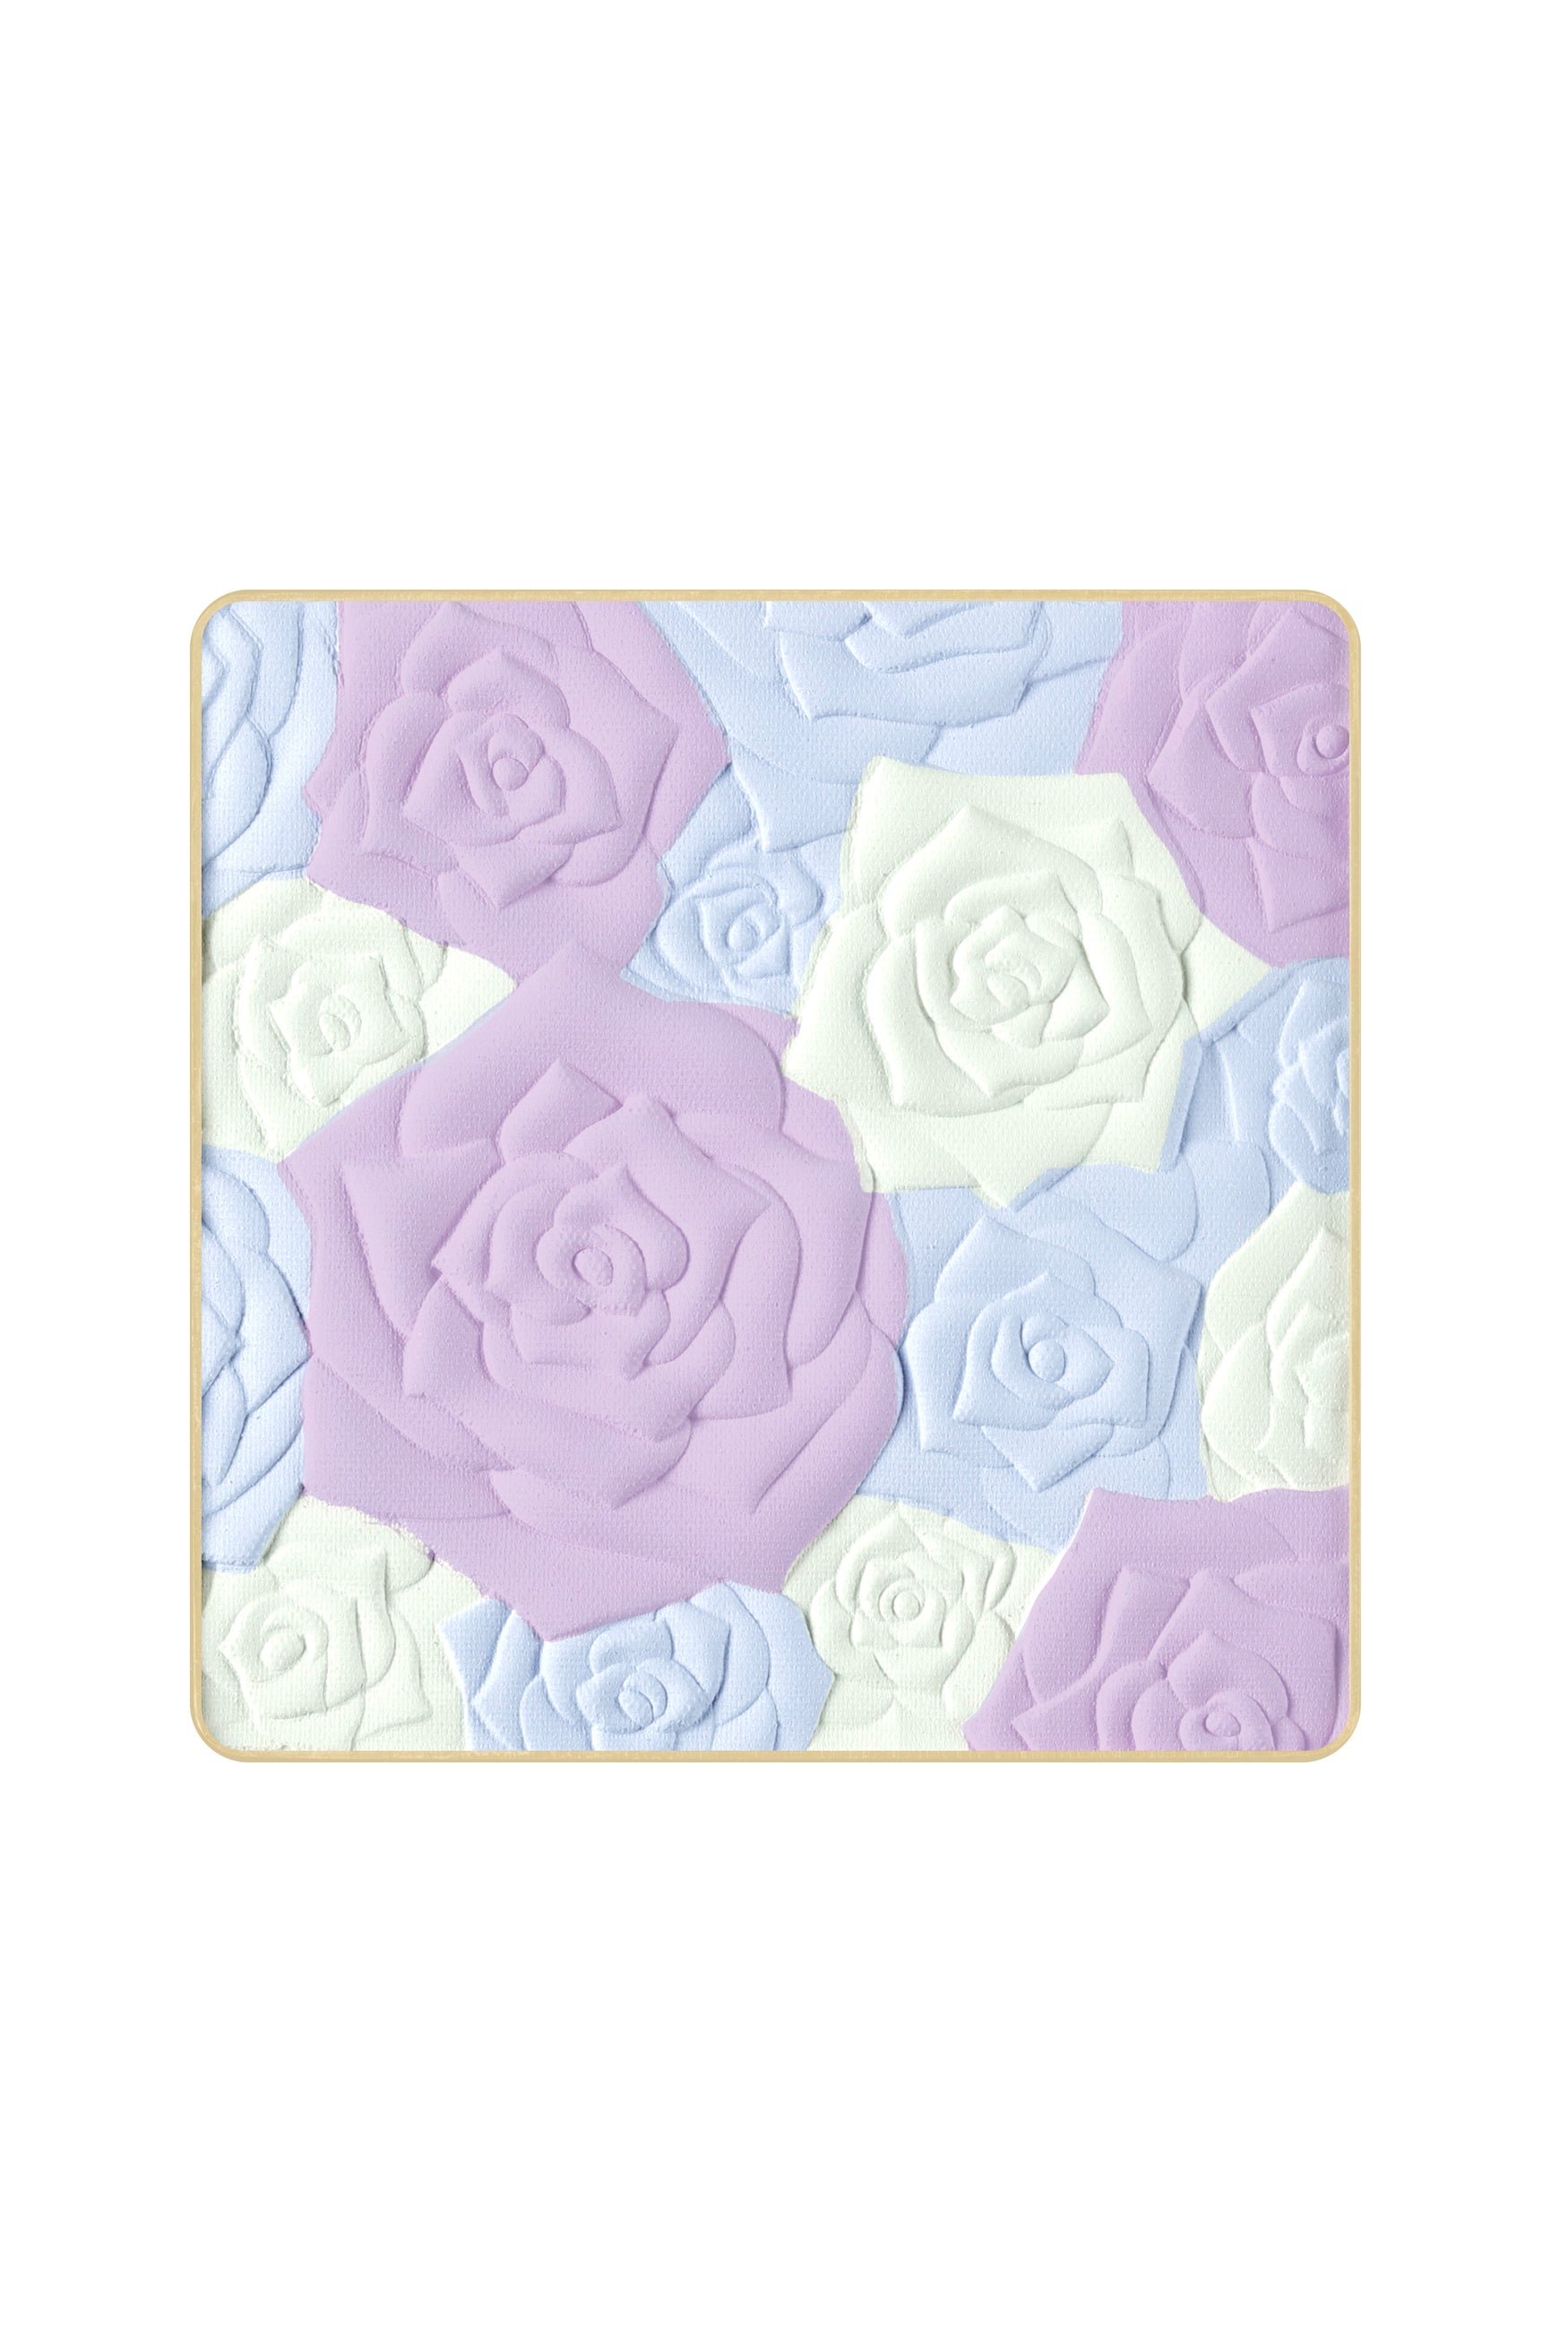 The 200 refill Anna Sui Rose Pressed Powder squared purple bouquet, Lavender. Baby blue shade